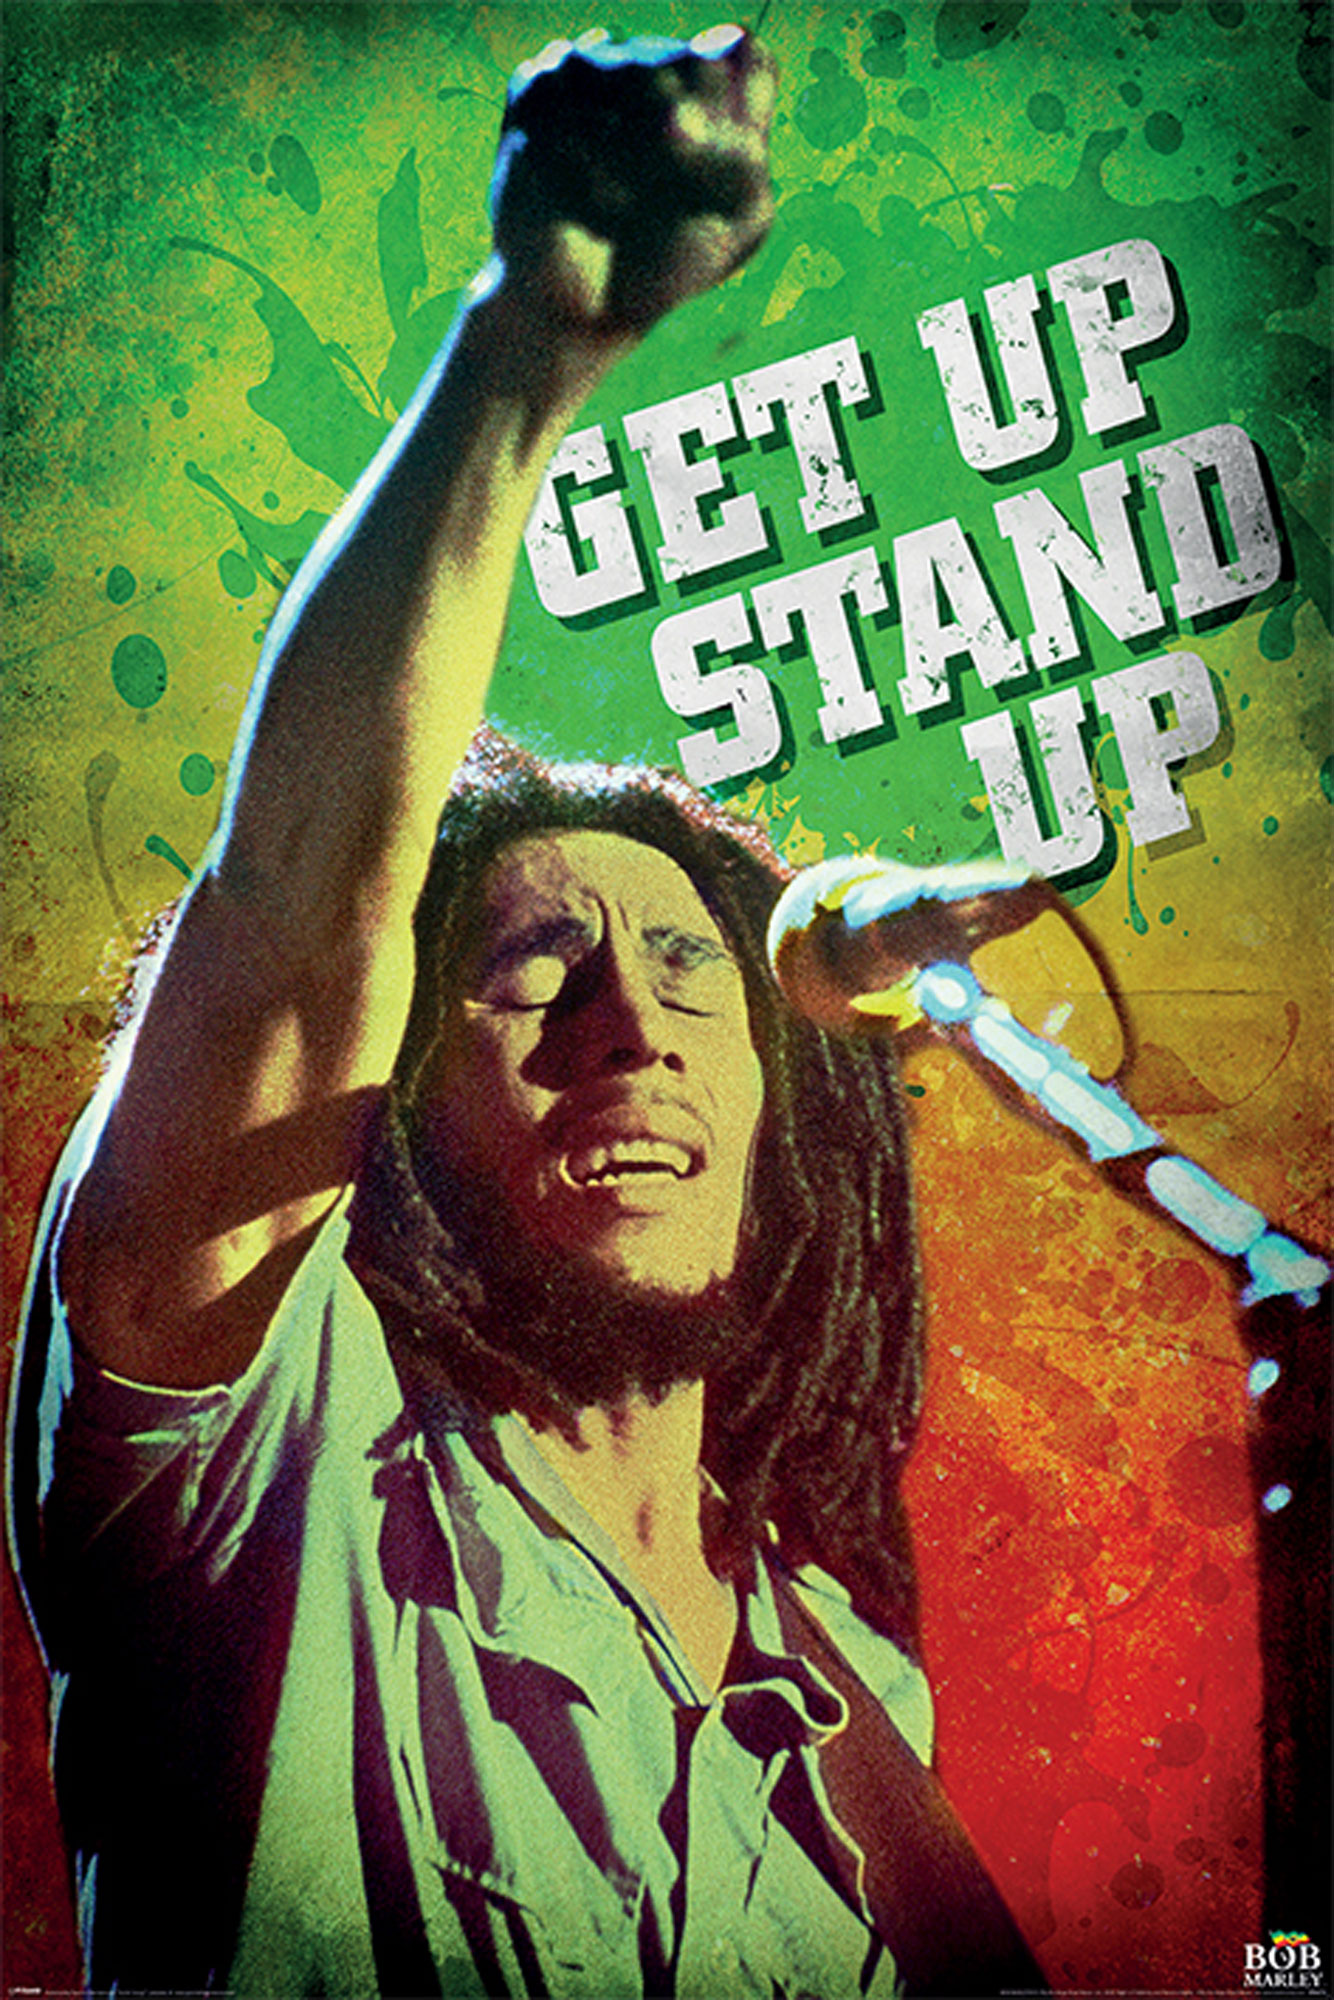 - Bob Up Get Up Marley, Stand